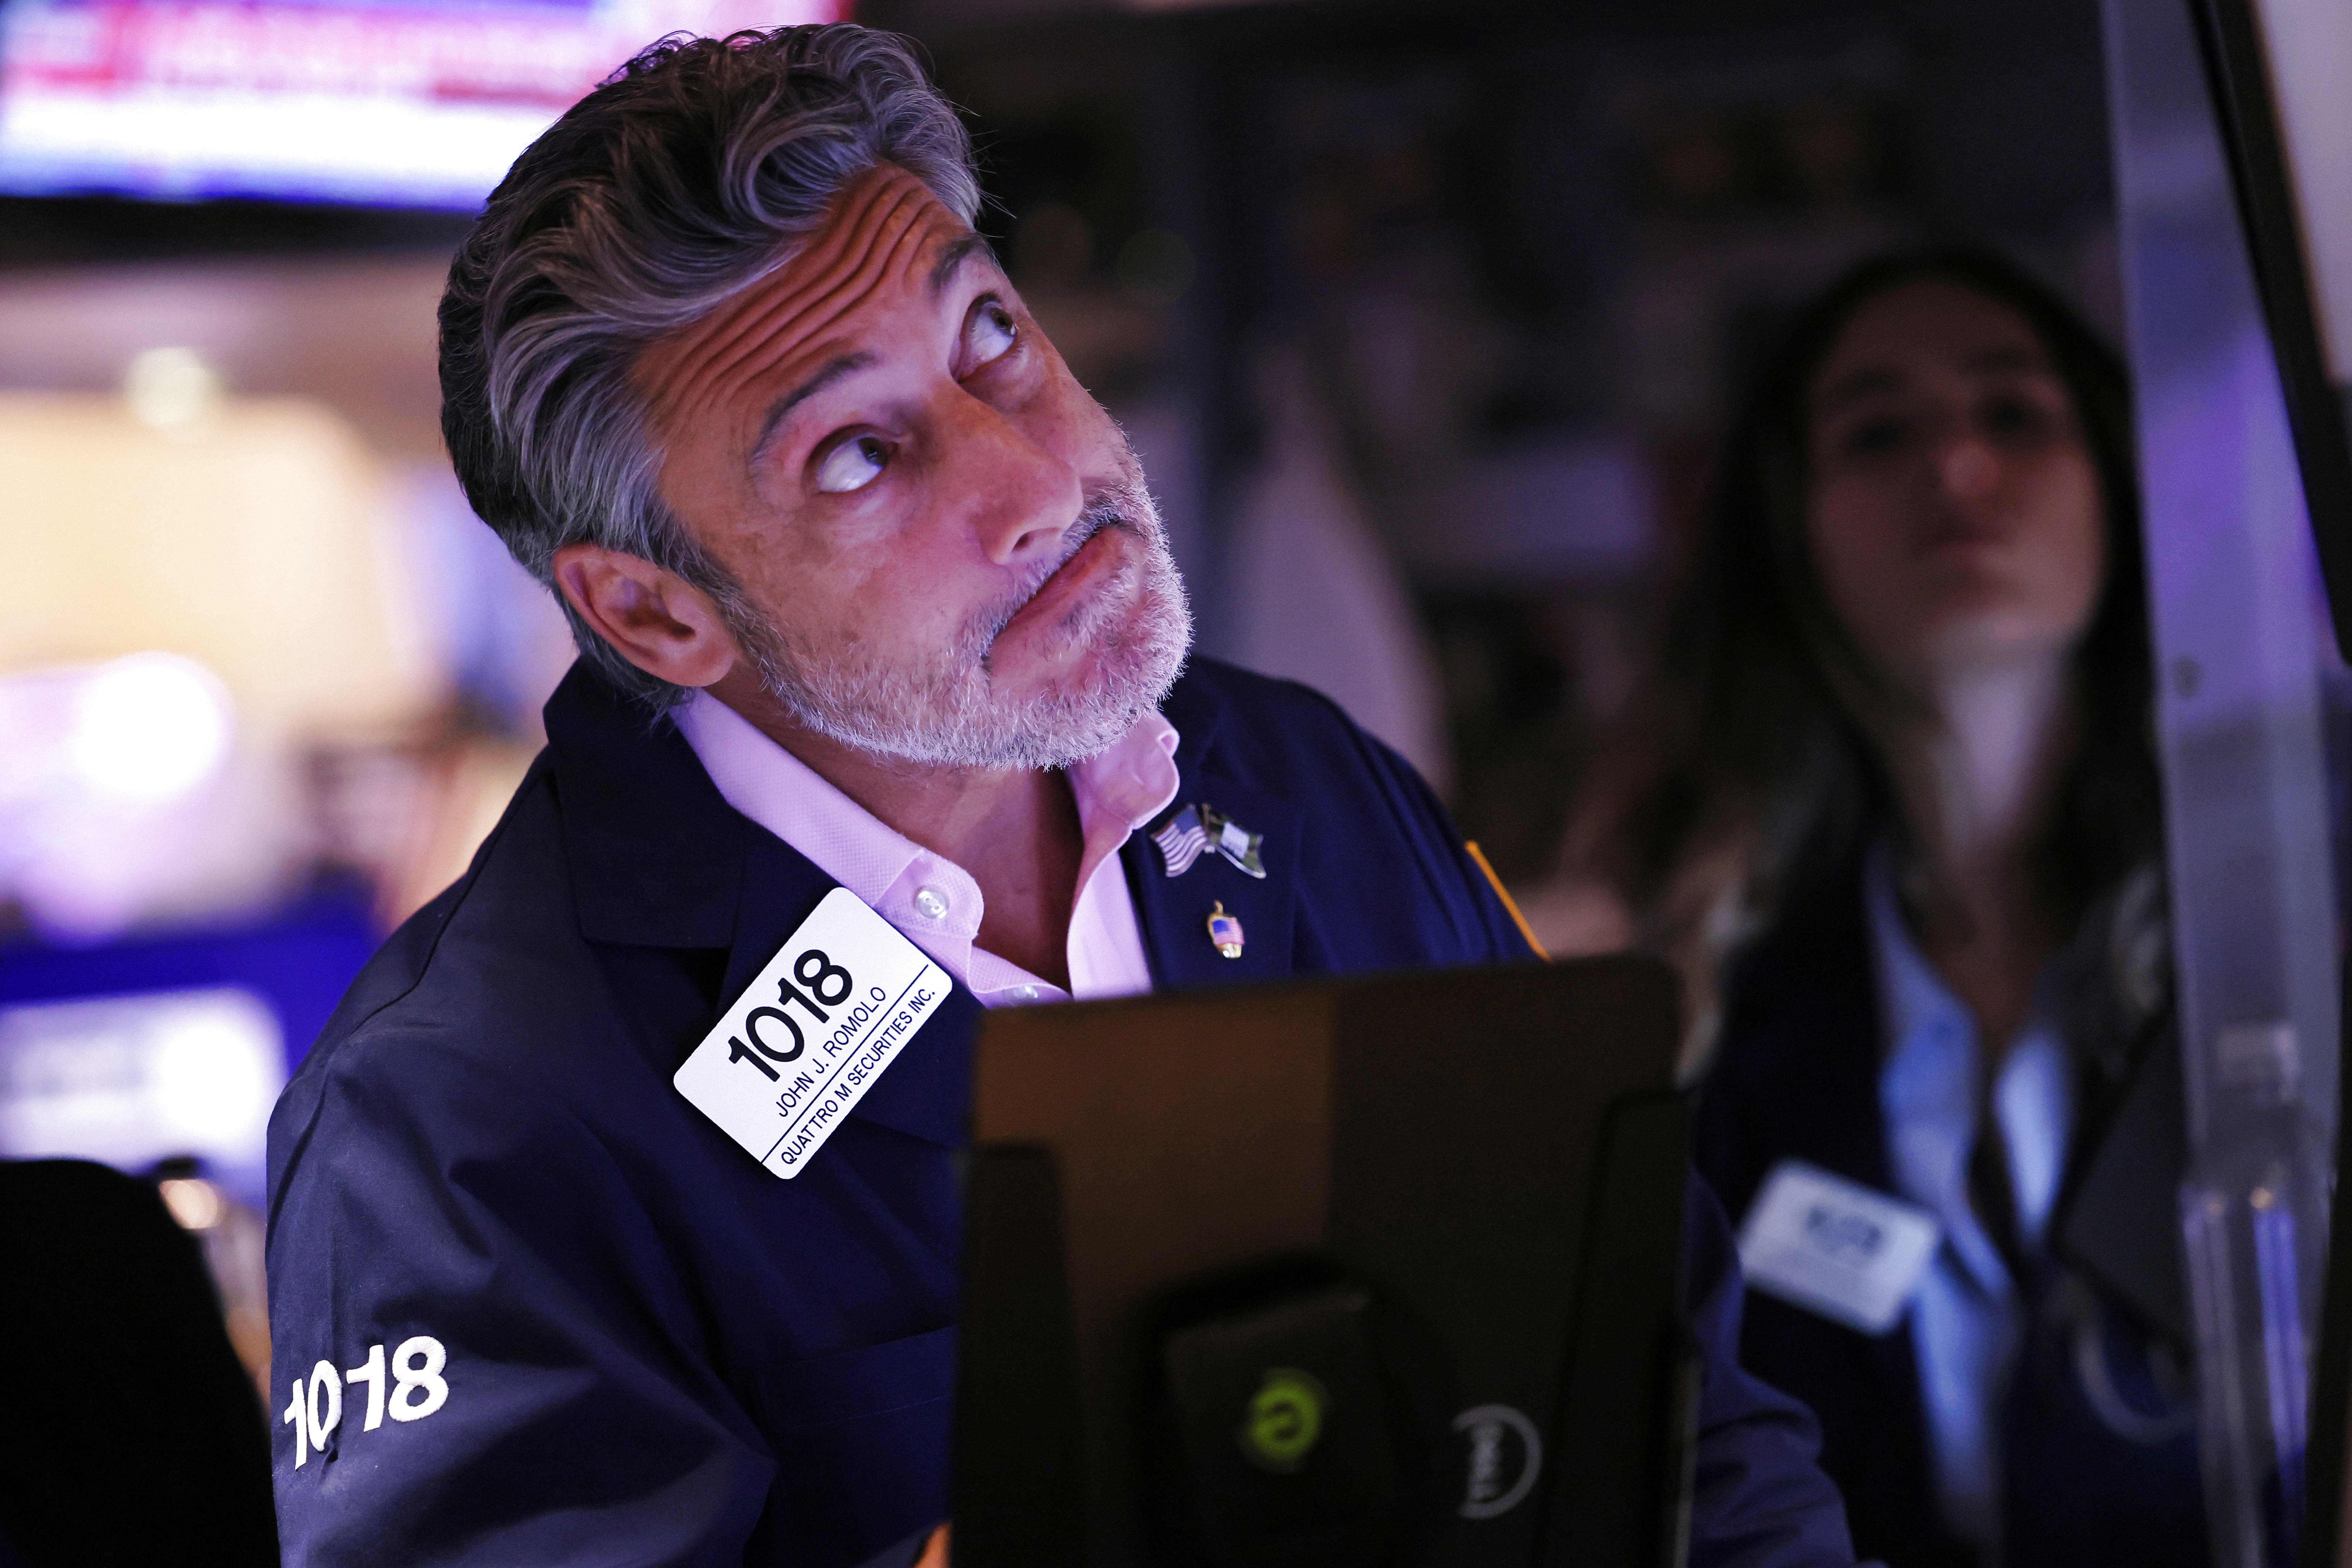 The signs traders are watching to signal the stock market has bottomed